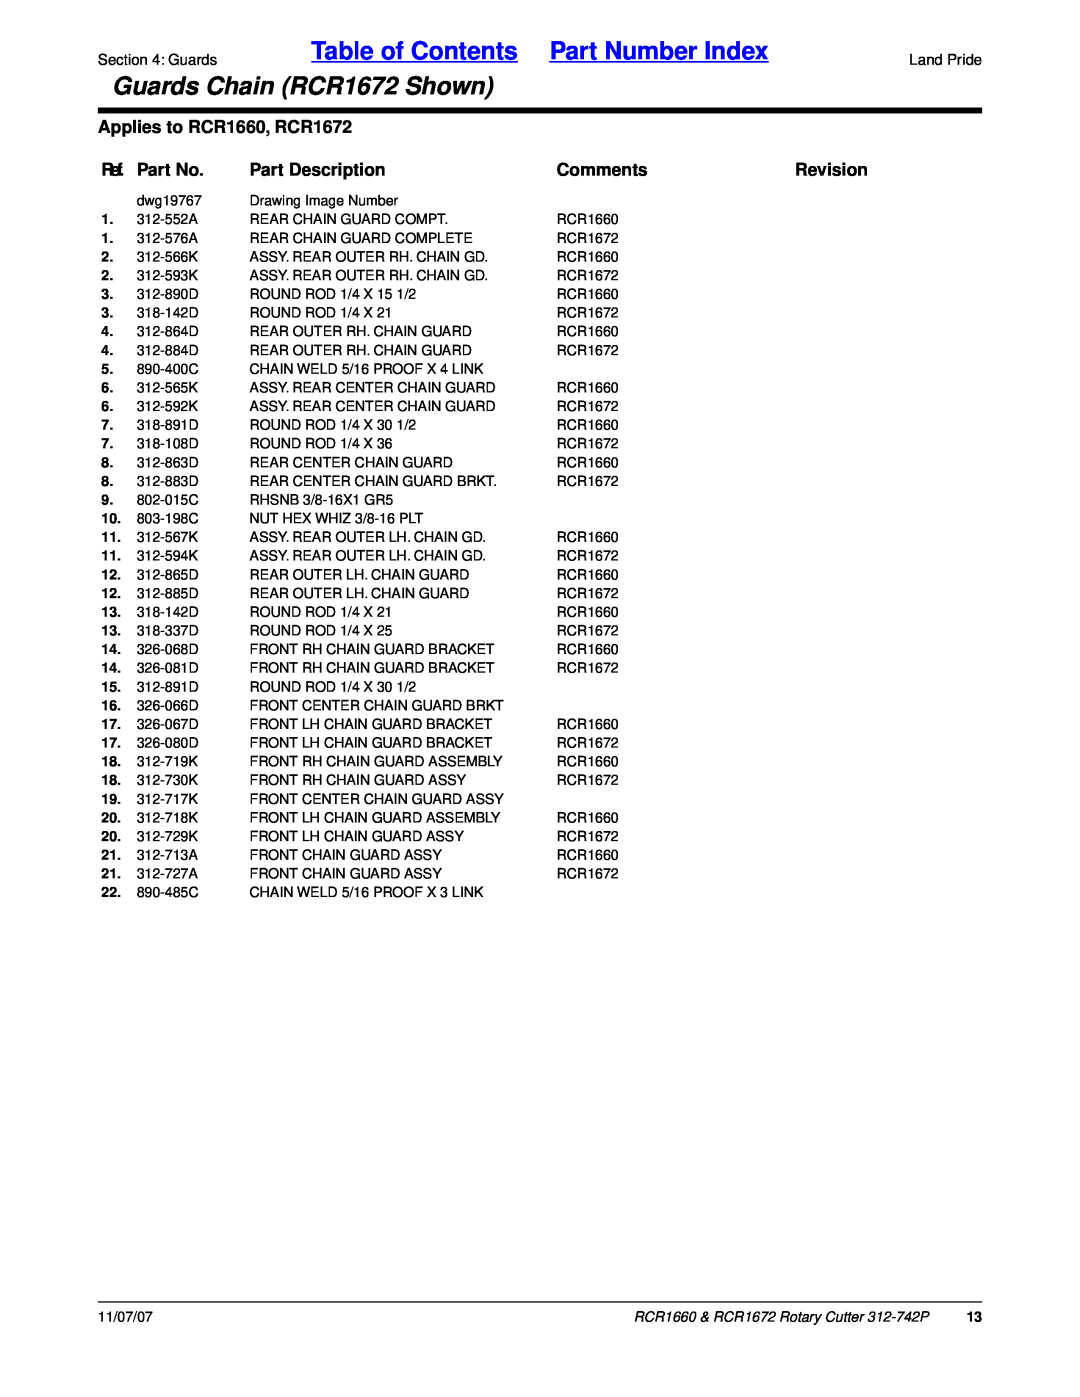 Land Pride Table of Contents Part Number Index, Guards Chain RCR1672 Shown, Applies to RCR1660, RCR1672, Ref. Part No 